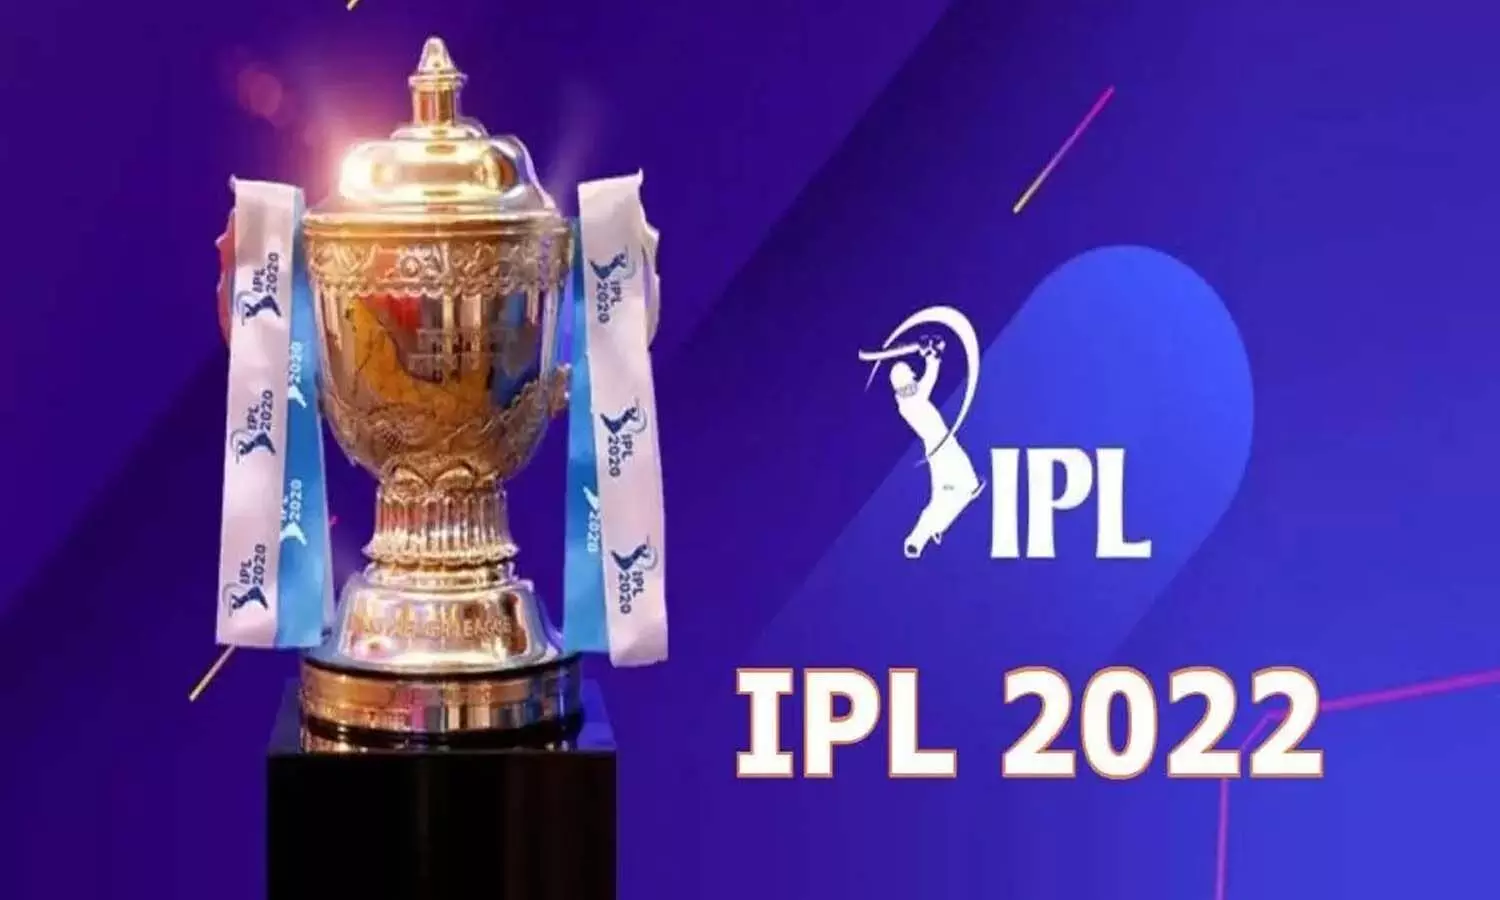 IPL 2022 mega auction in February, if Corona remains under control then auction will be held in Bengaluru on 7-8 February